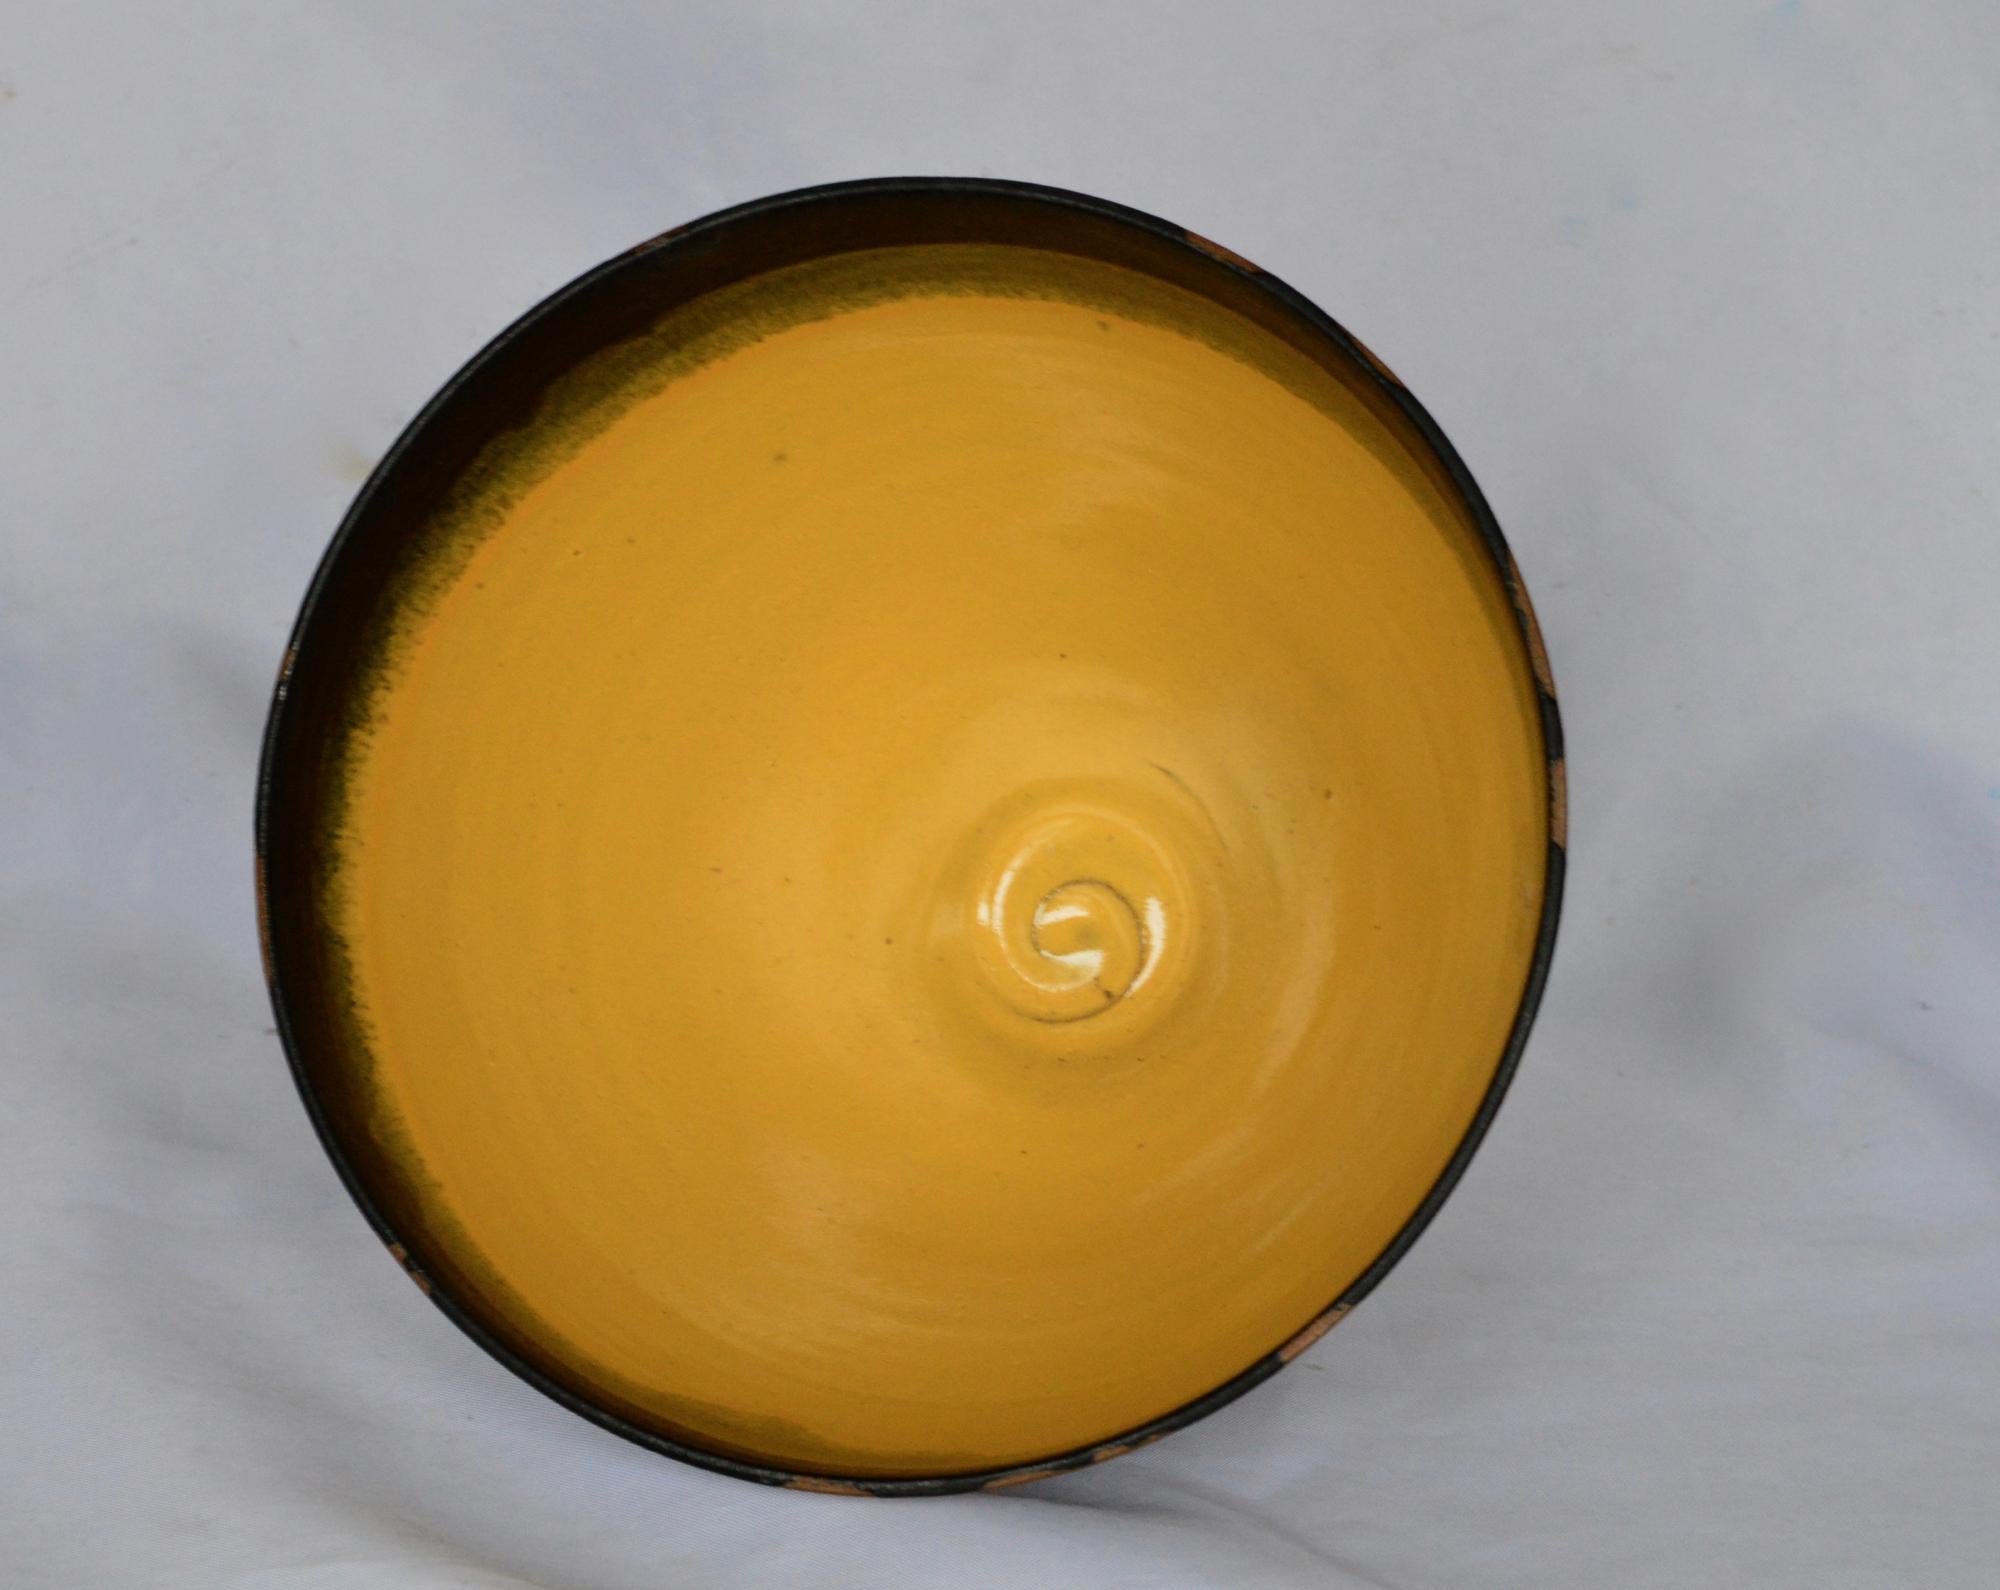 Graphic Ceramic Bowl by Liz Kinder In Good Condition For Sale In Charlottesville, VA